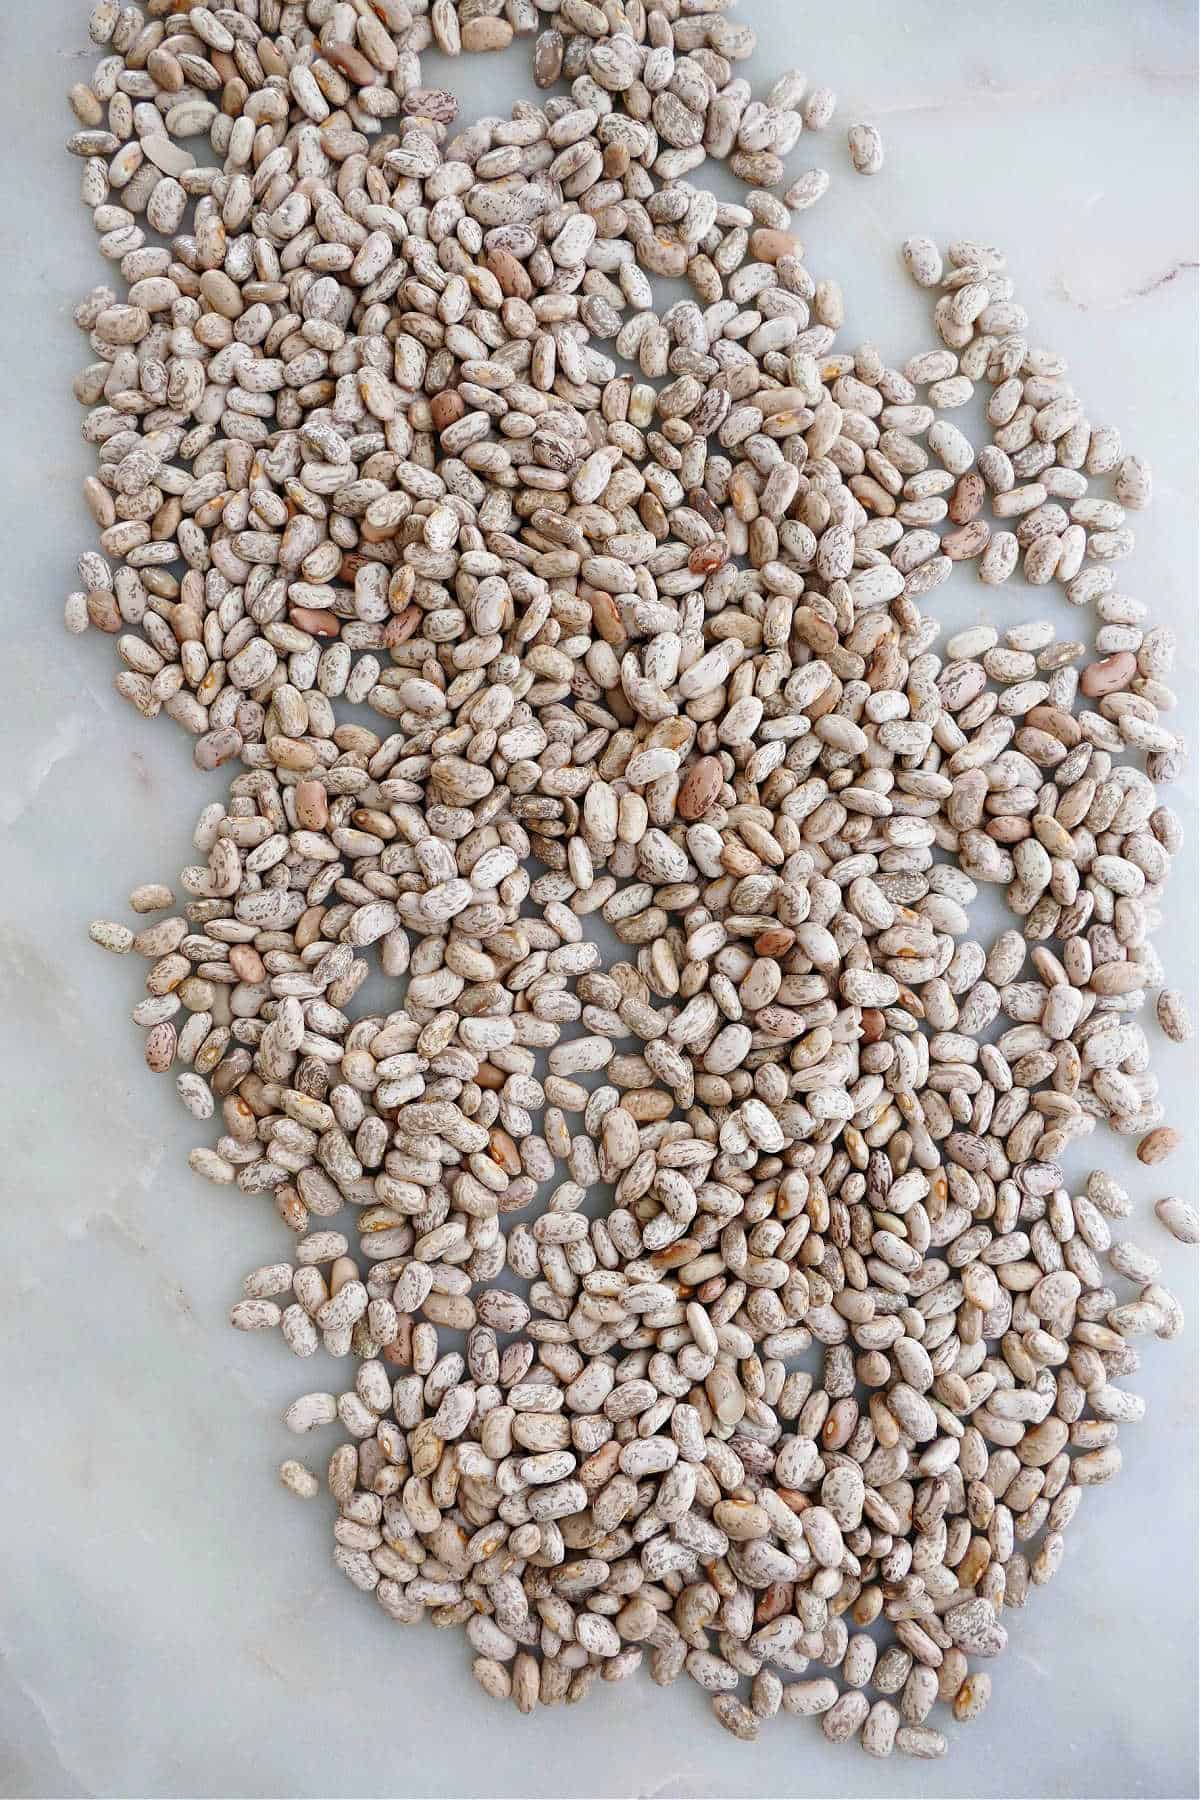 dry pinto beans spread out next to each other on a counter